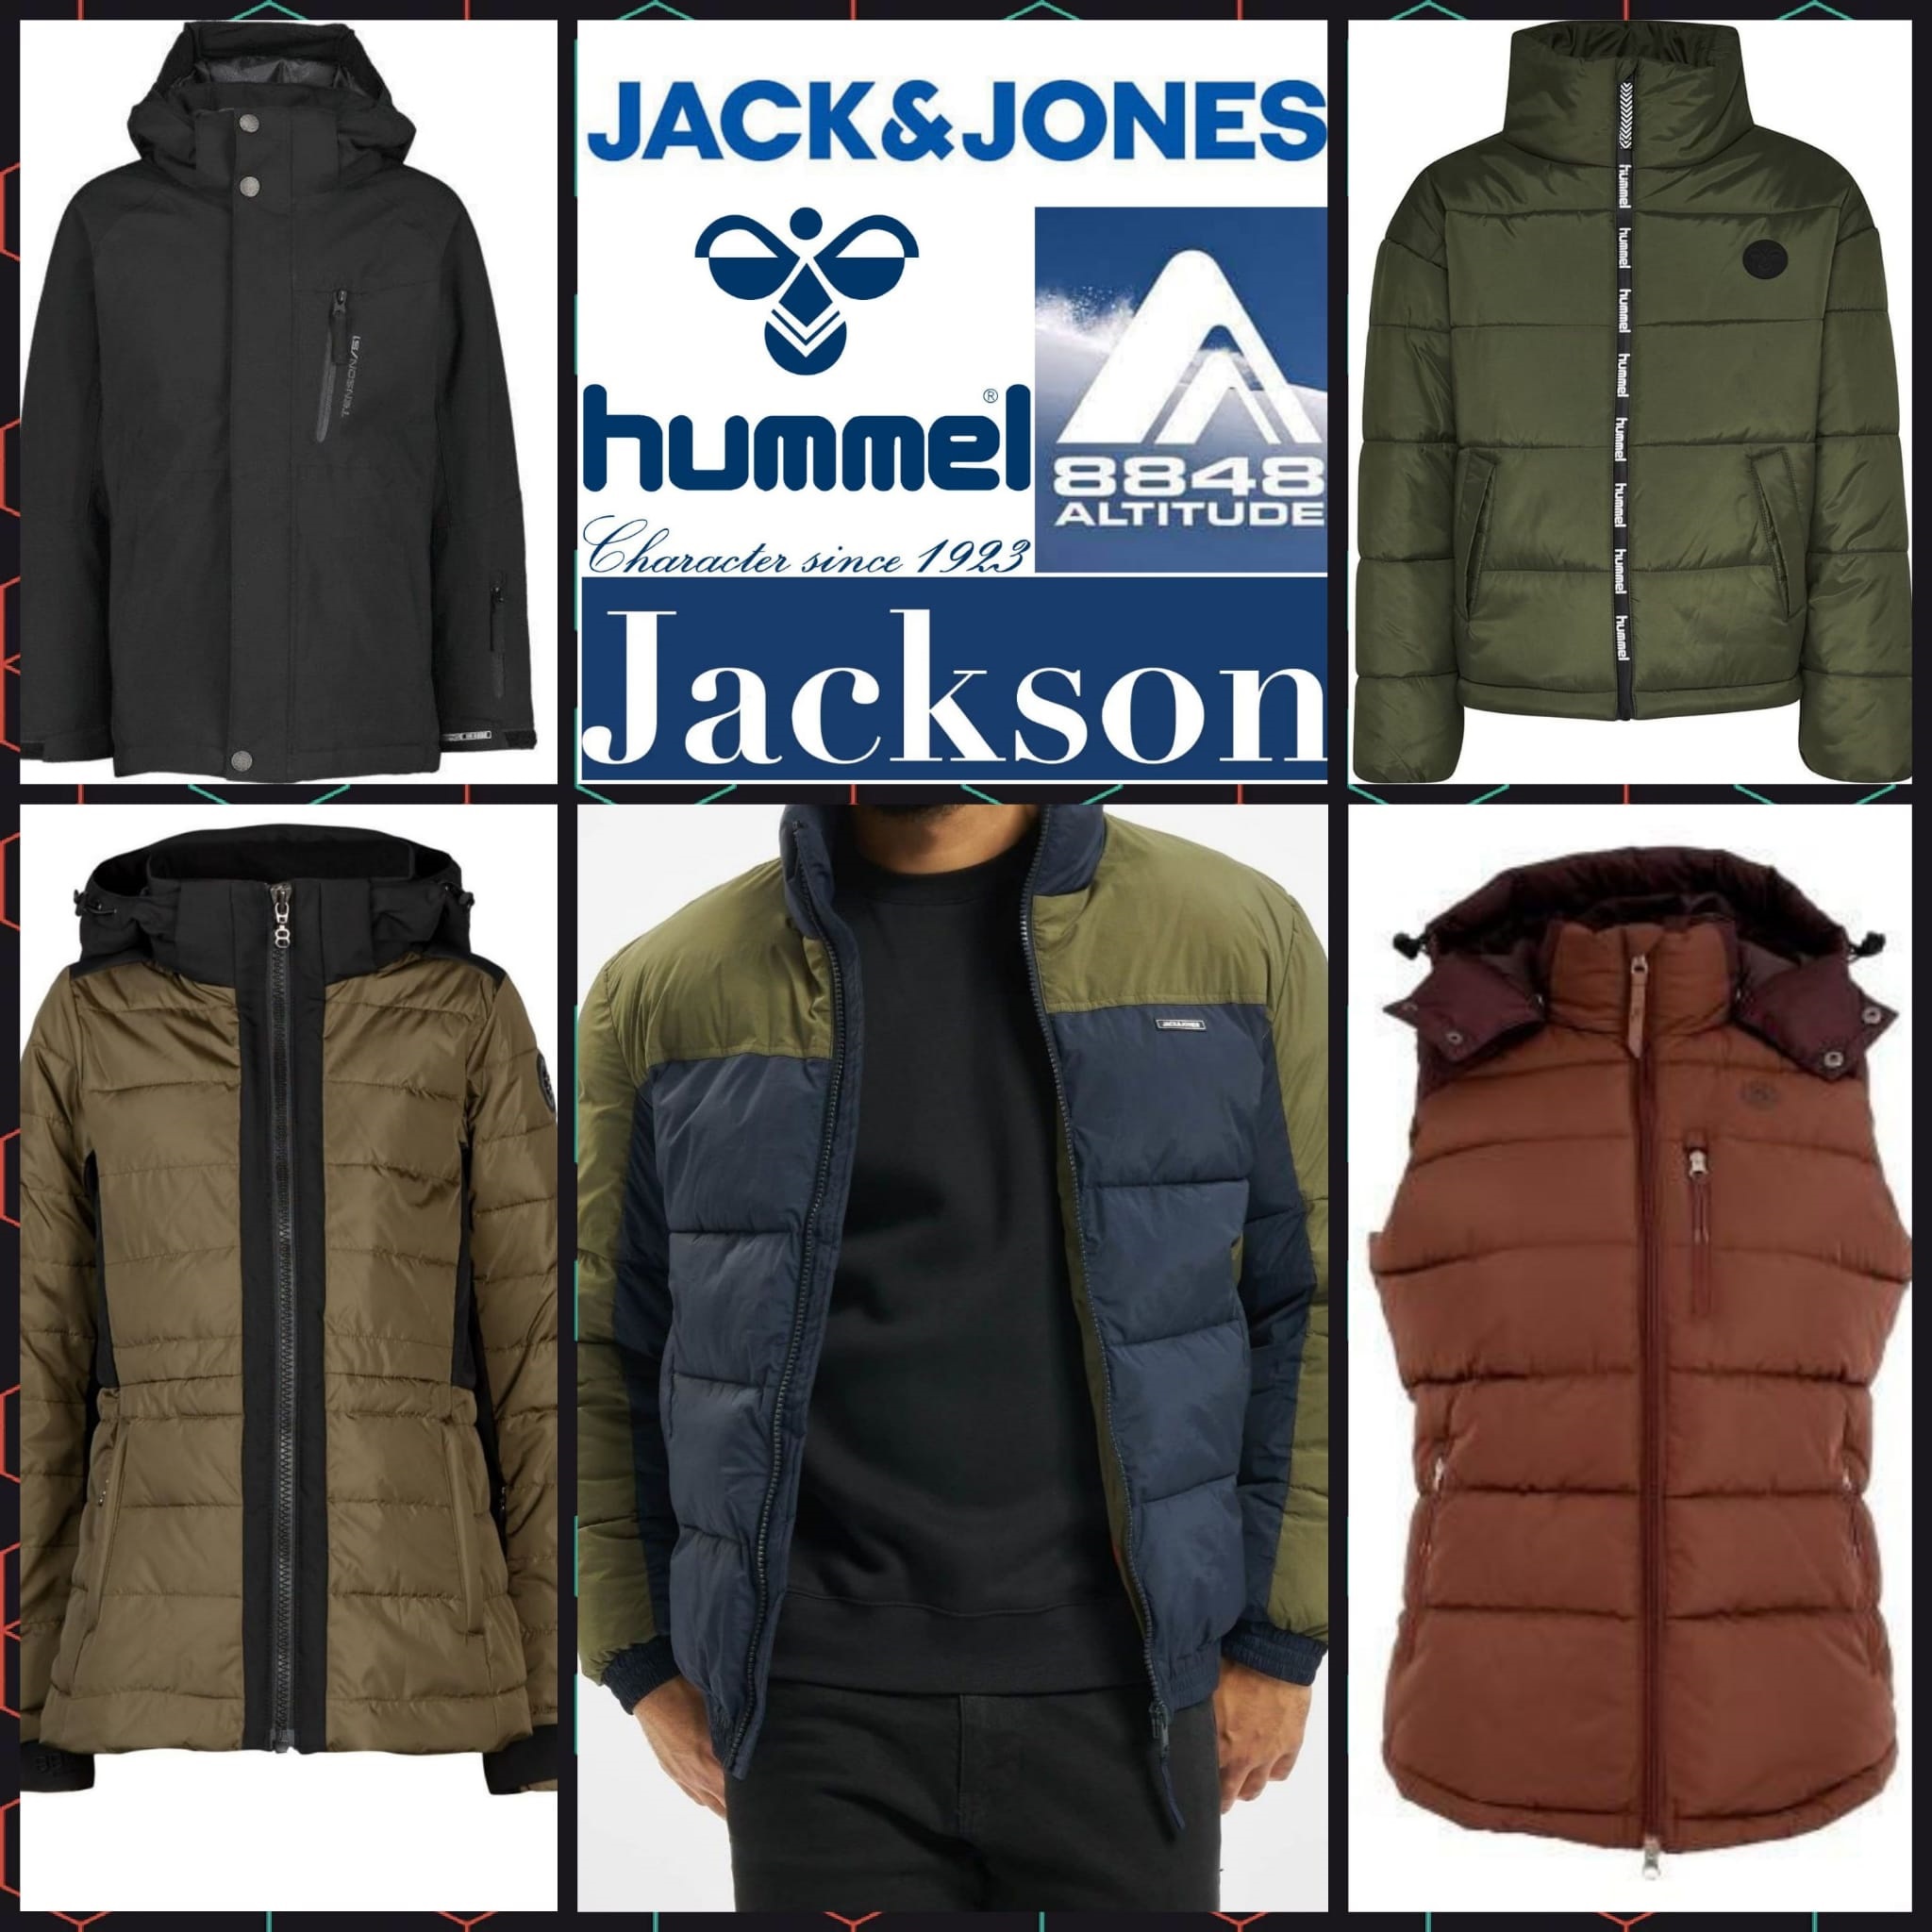 Mix of jackets for schoolchildren and teenagers